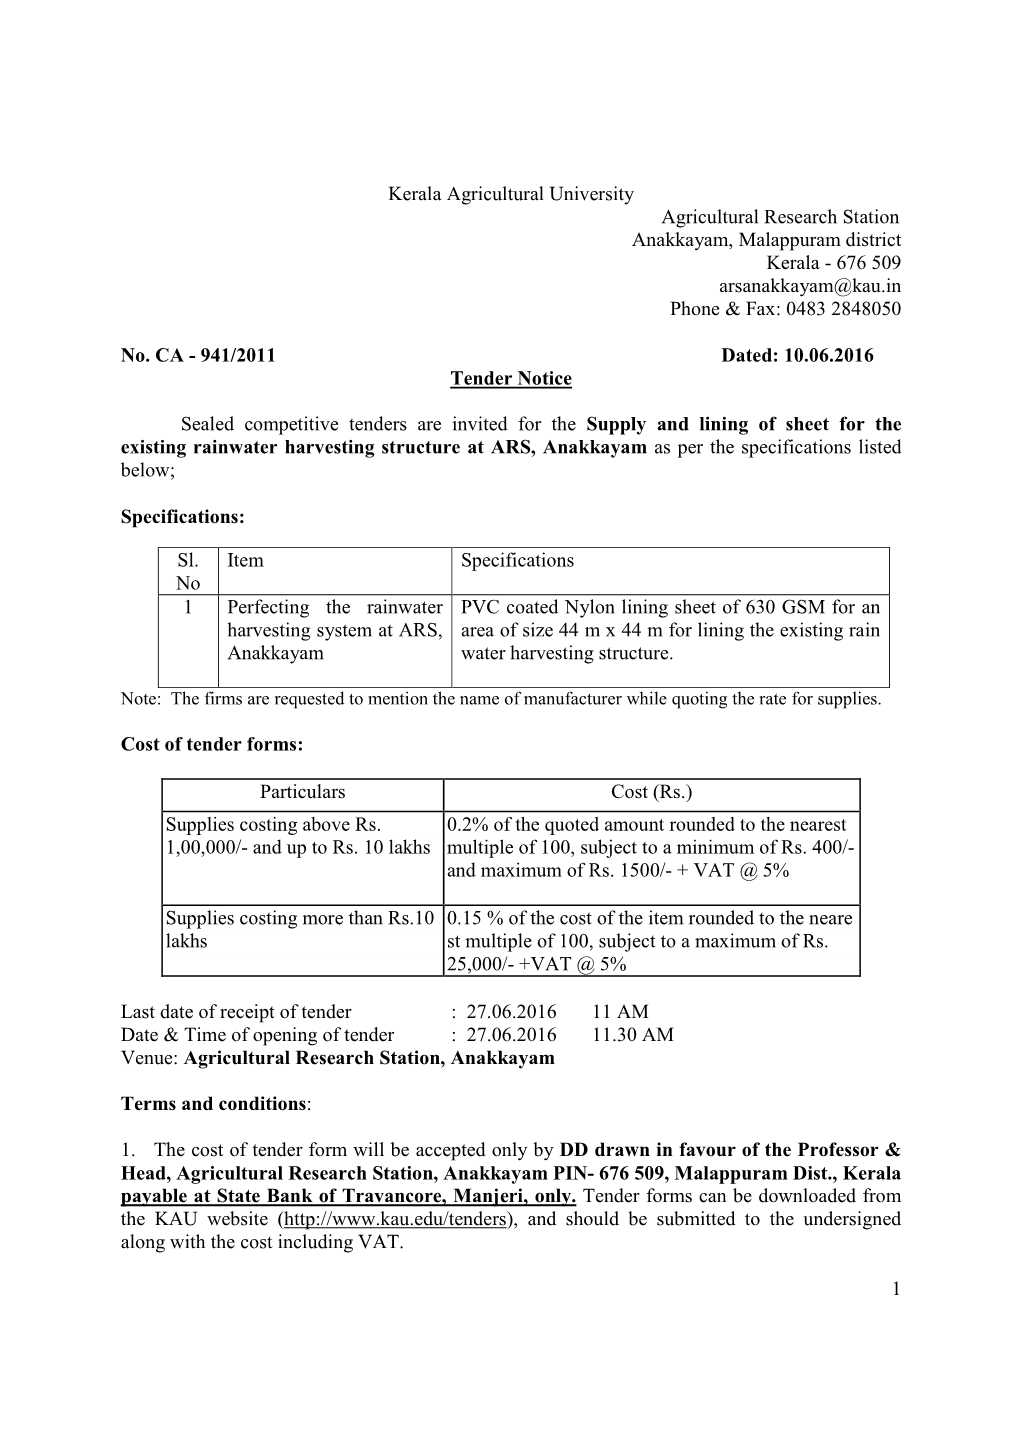 ARS AKM Tender Notice for Lining of RW Harvesting Structure